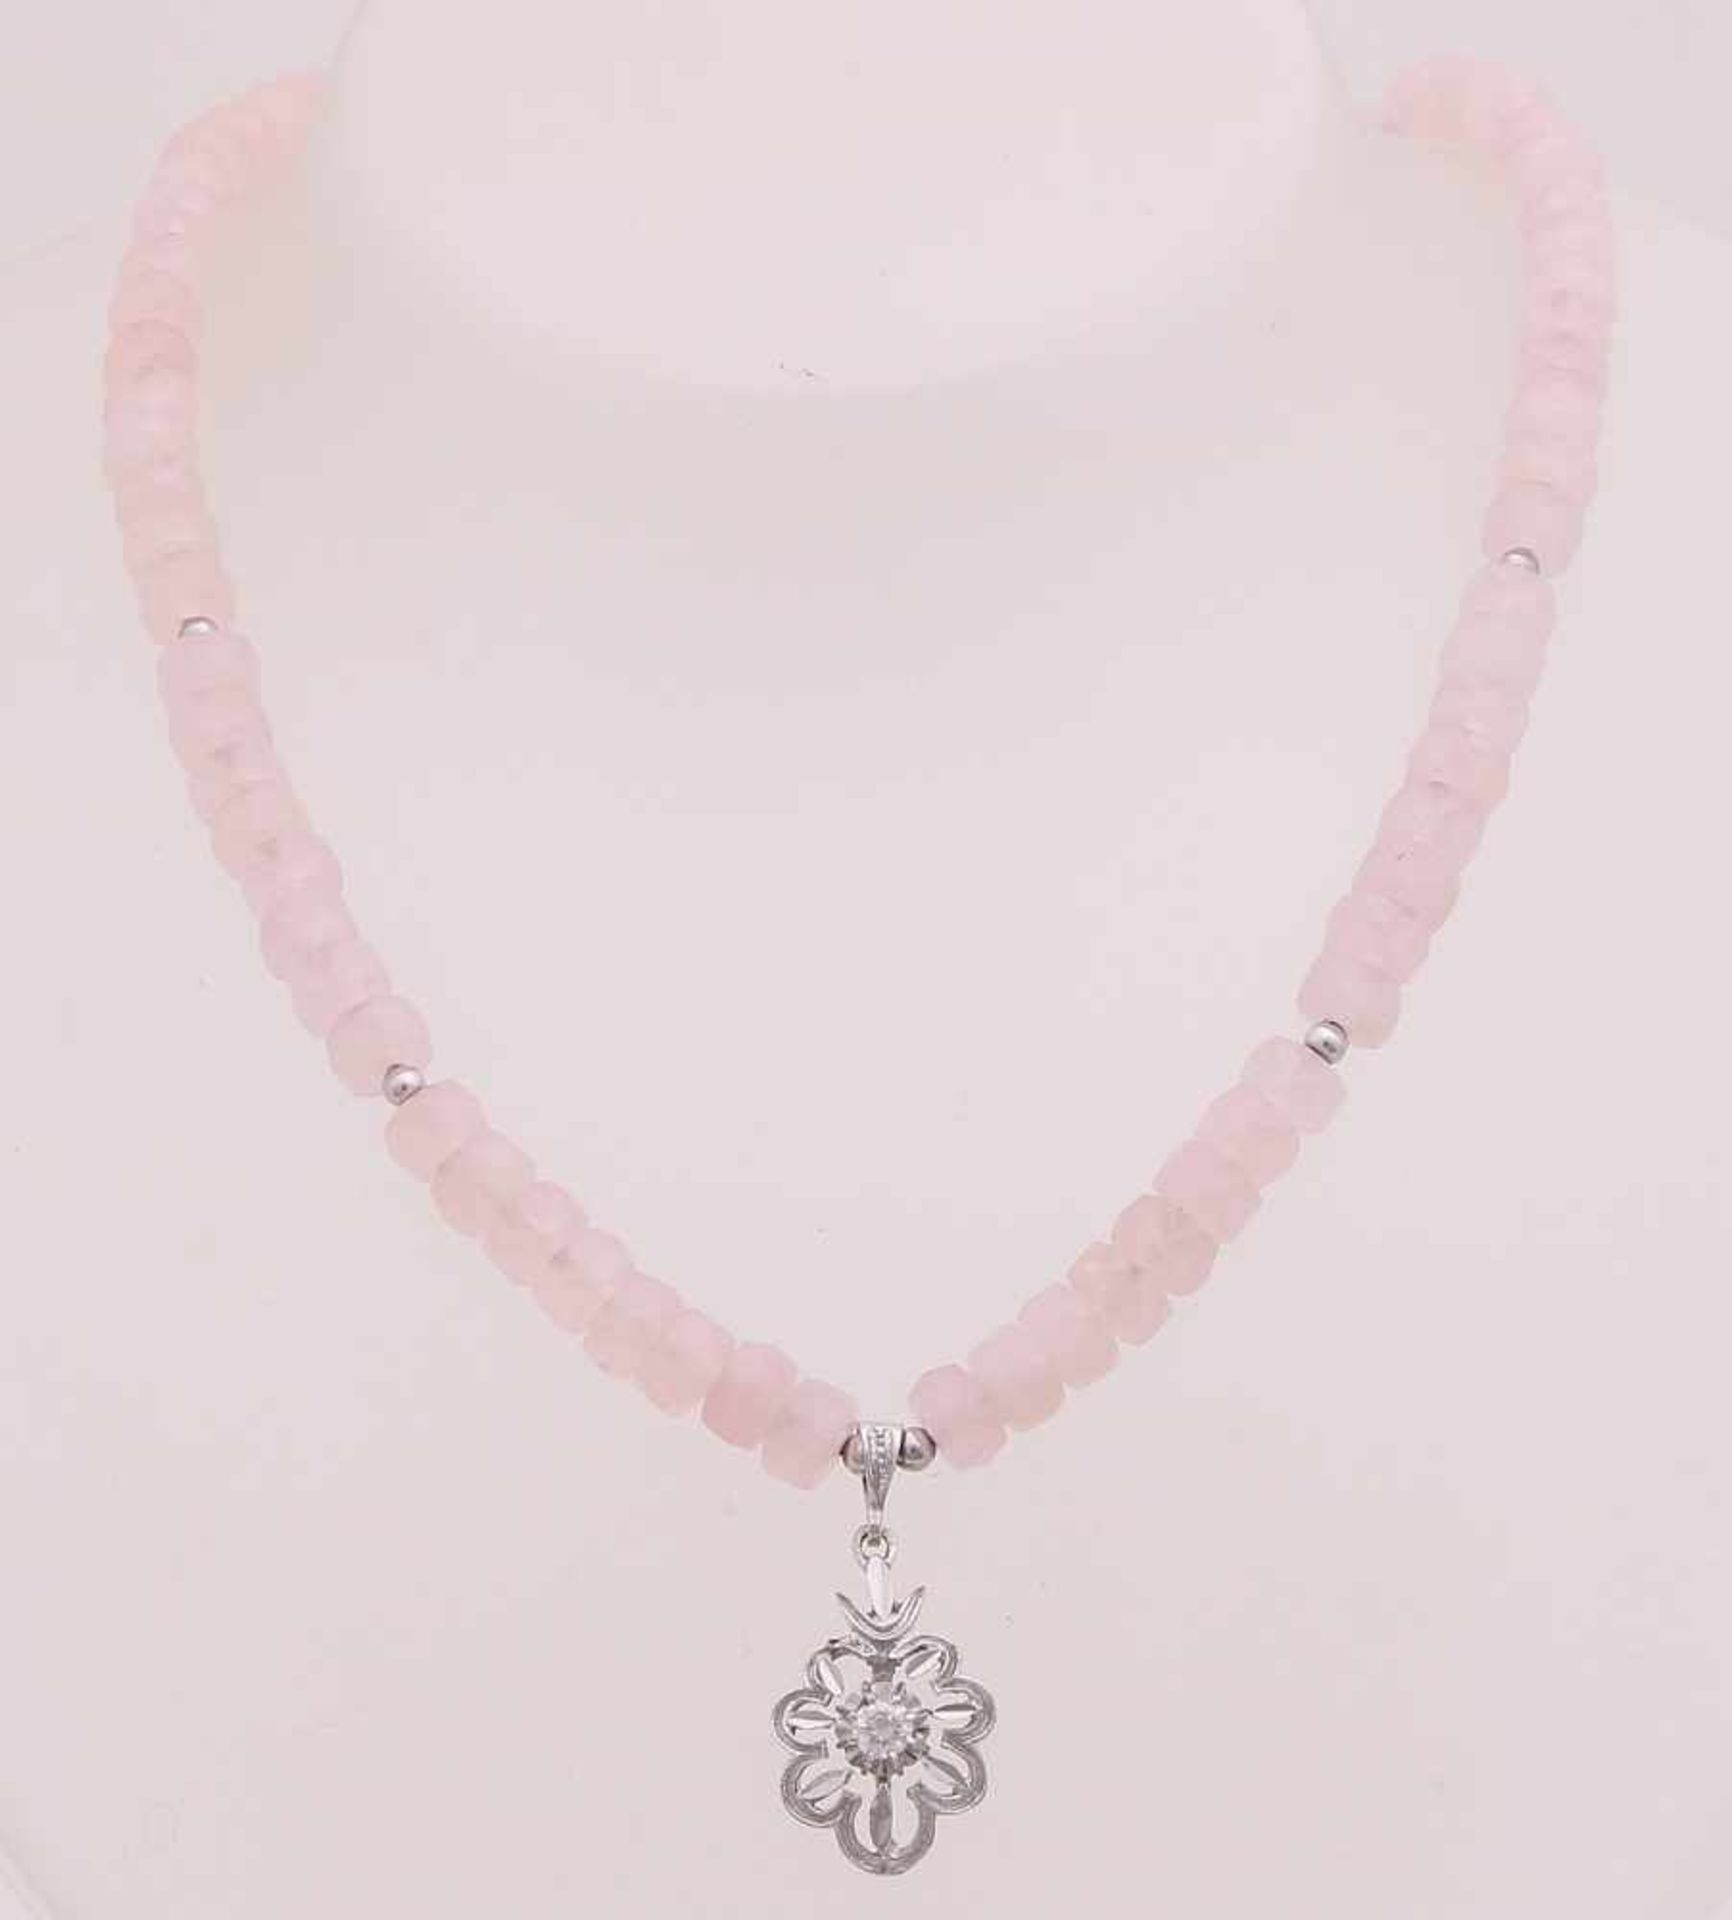 Necklace of rose quartz with white gold balls and closure, 585/000, and a white gold pendant with